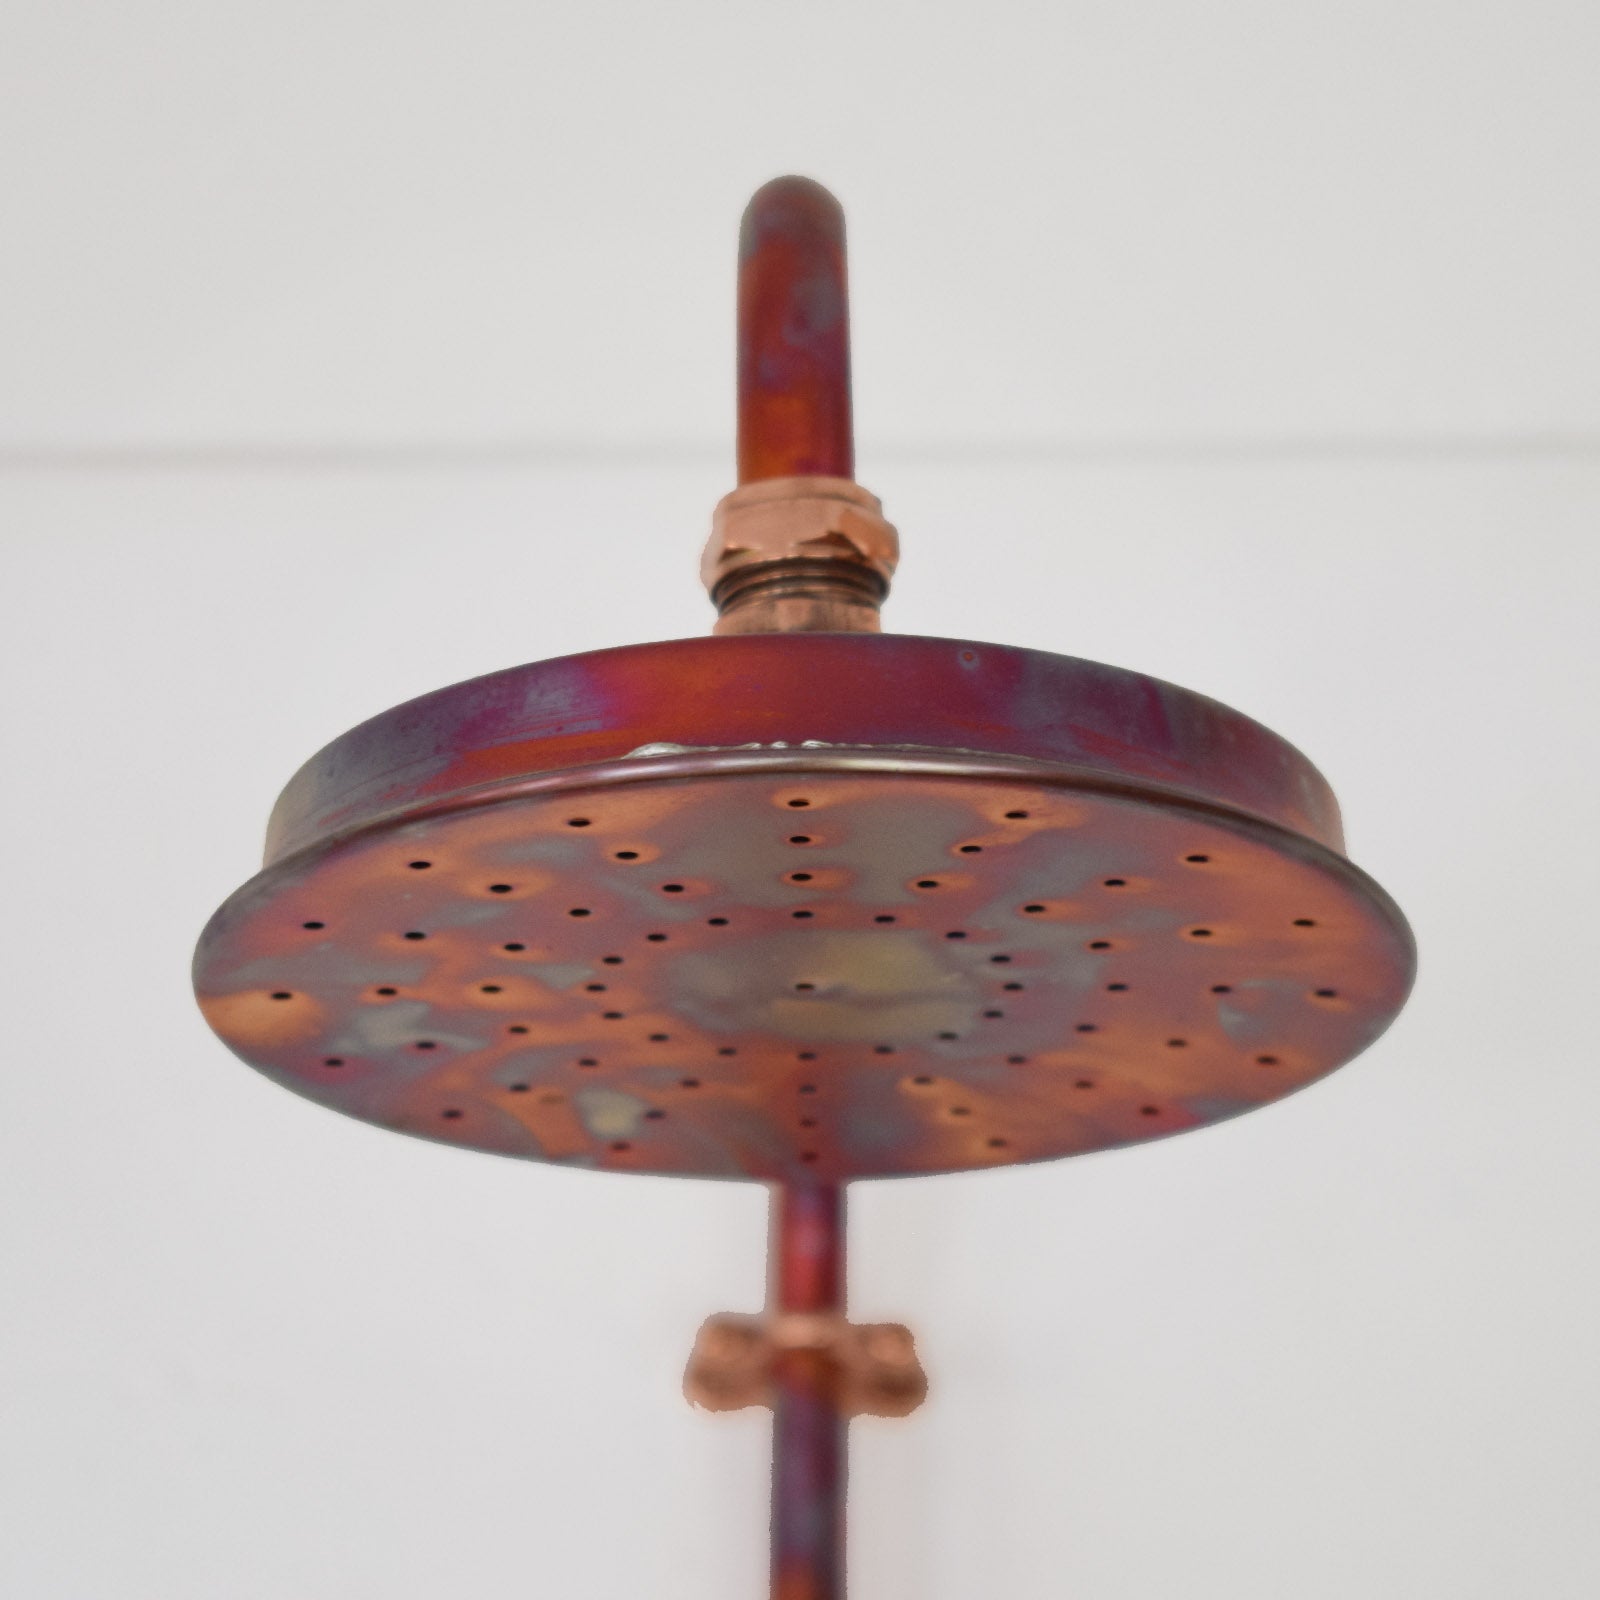 marbled copper shower head close up image